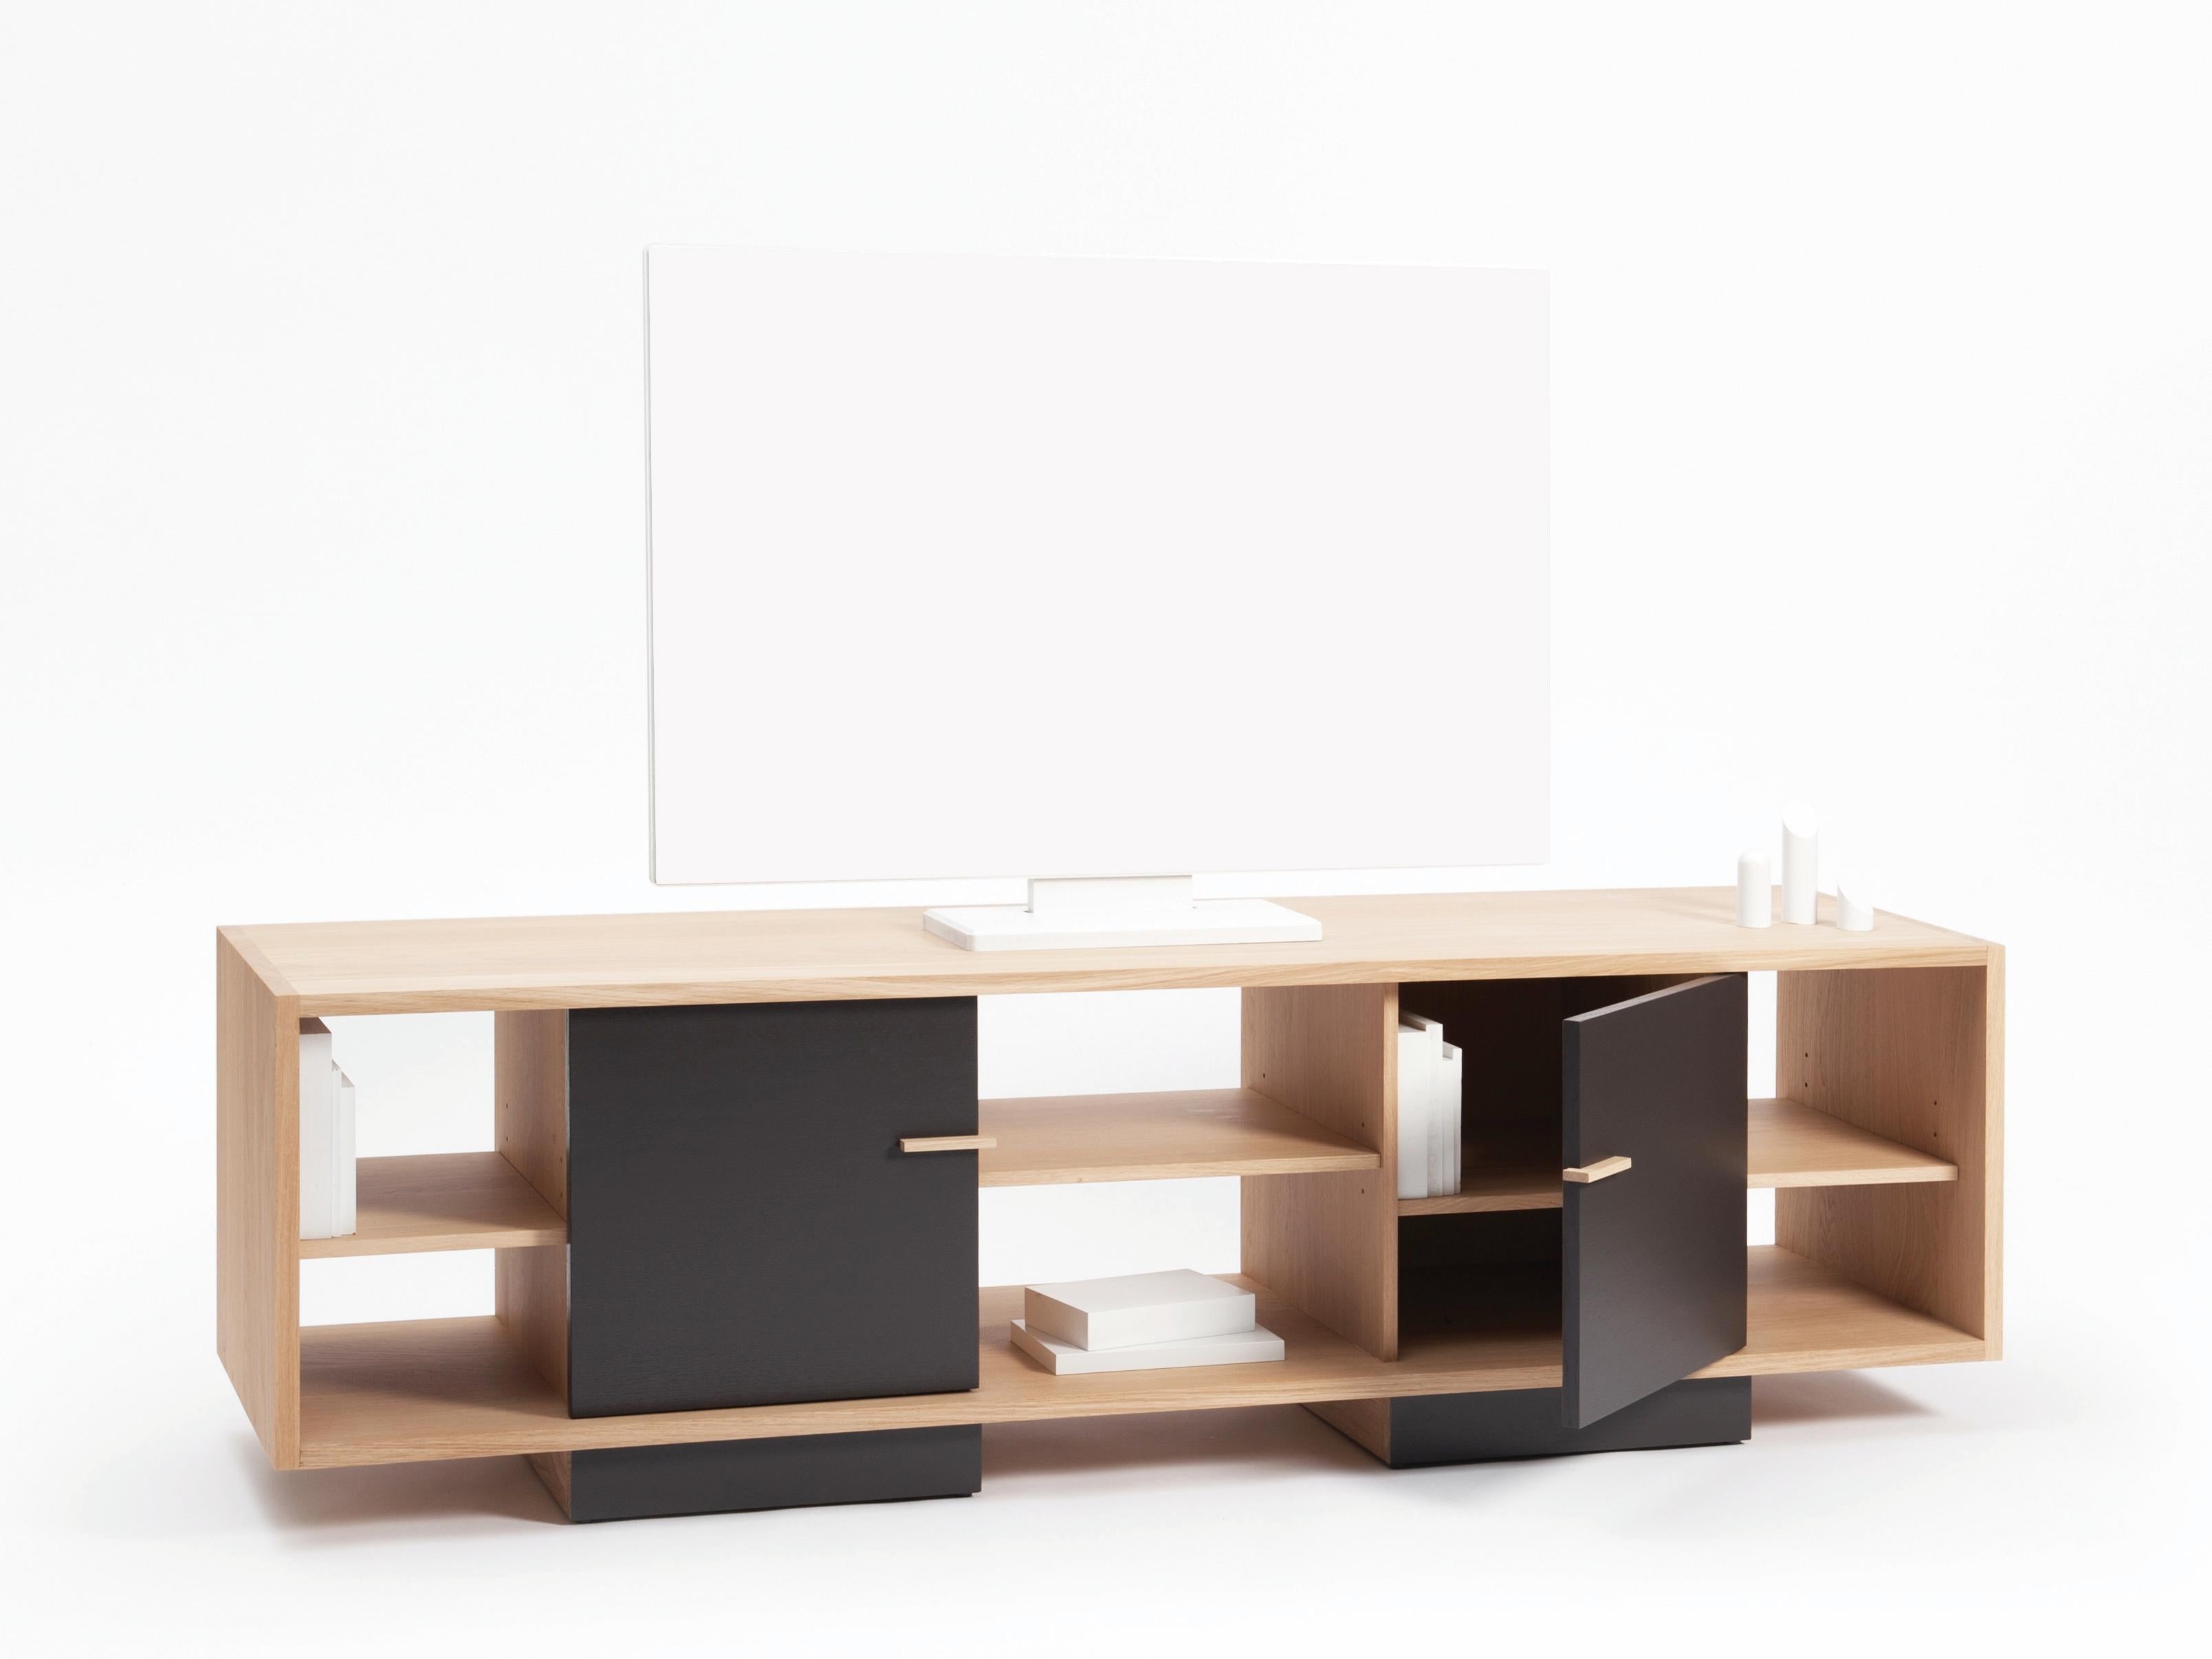 Simple and elegant, the ITA TV unit is inspired from the Japanese minimalism. Its length (1,64m), its 2 doors and its 5 adjustable shelves will provide a lot of space and hidden storage for multimedia equipment. On wheels, it is therefore easy to